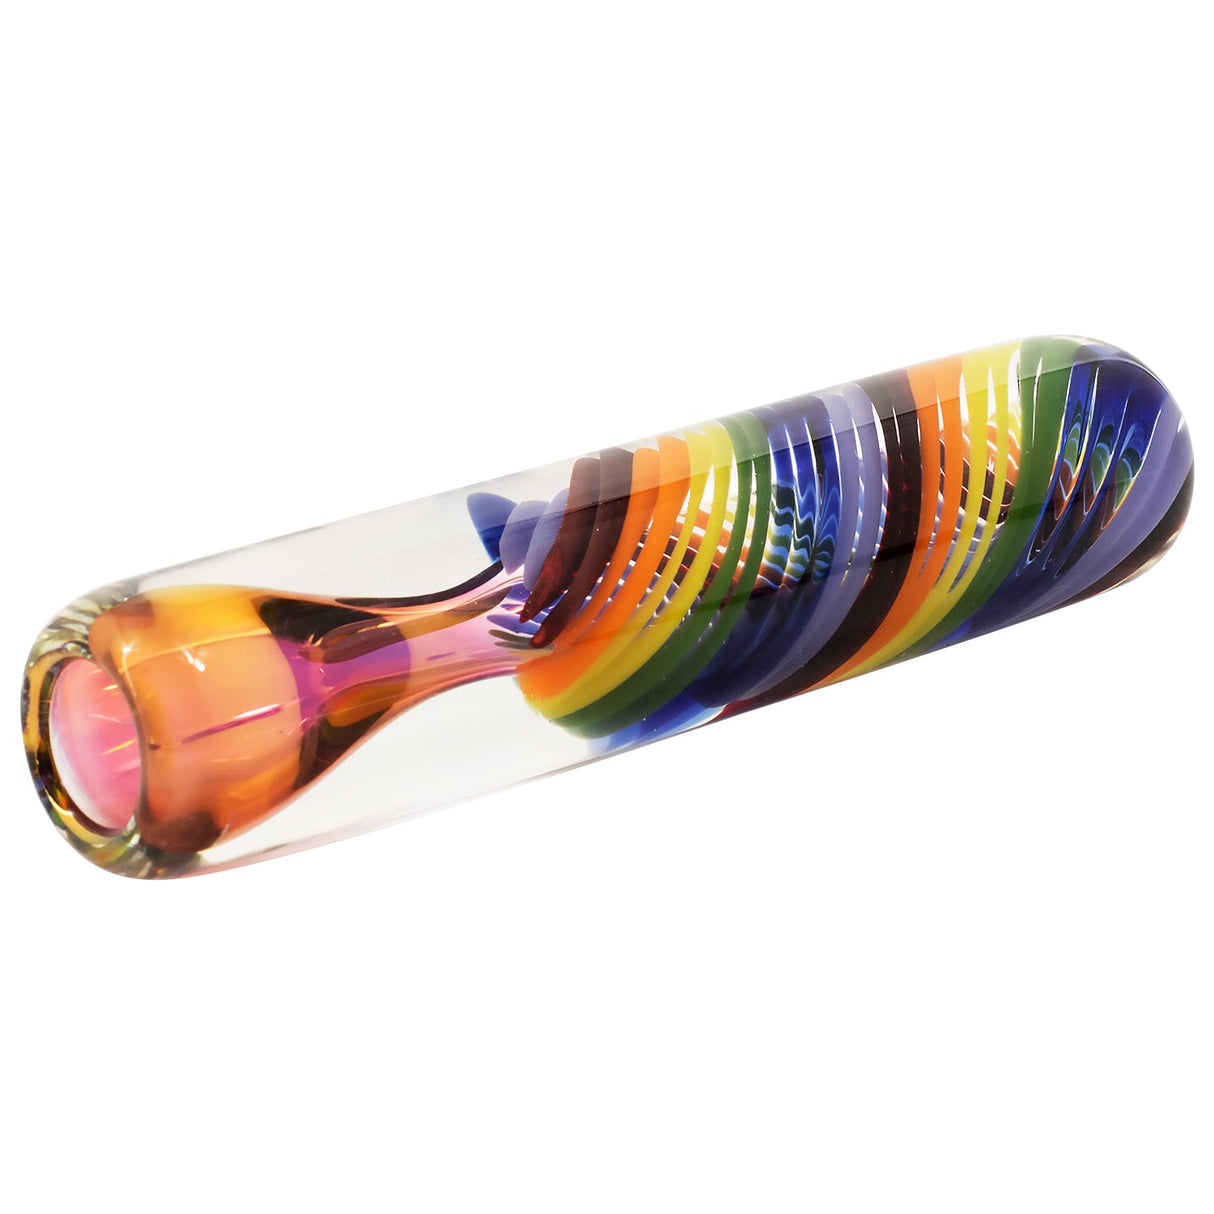 LA Pipes Twisted Rainbow Fumed Glass Chillum, 3.25" Length, Side View